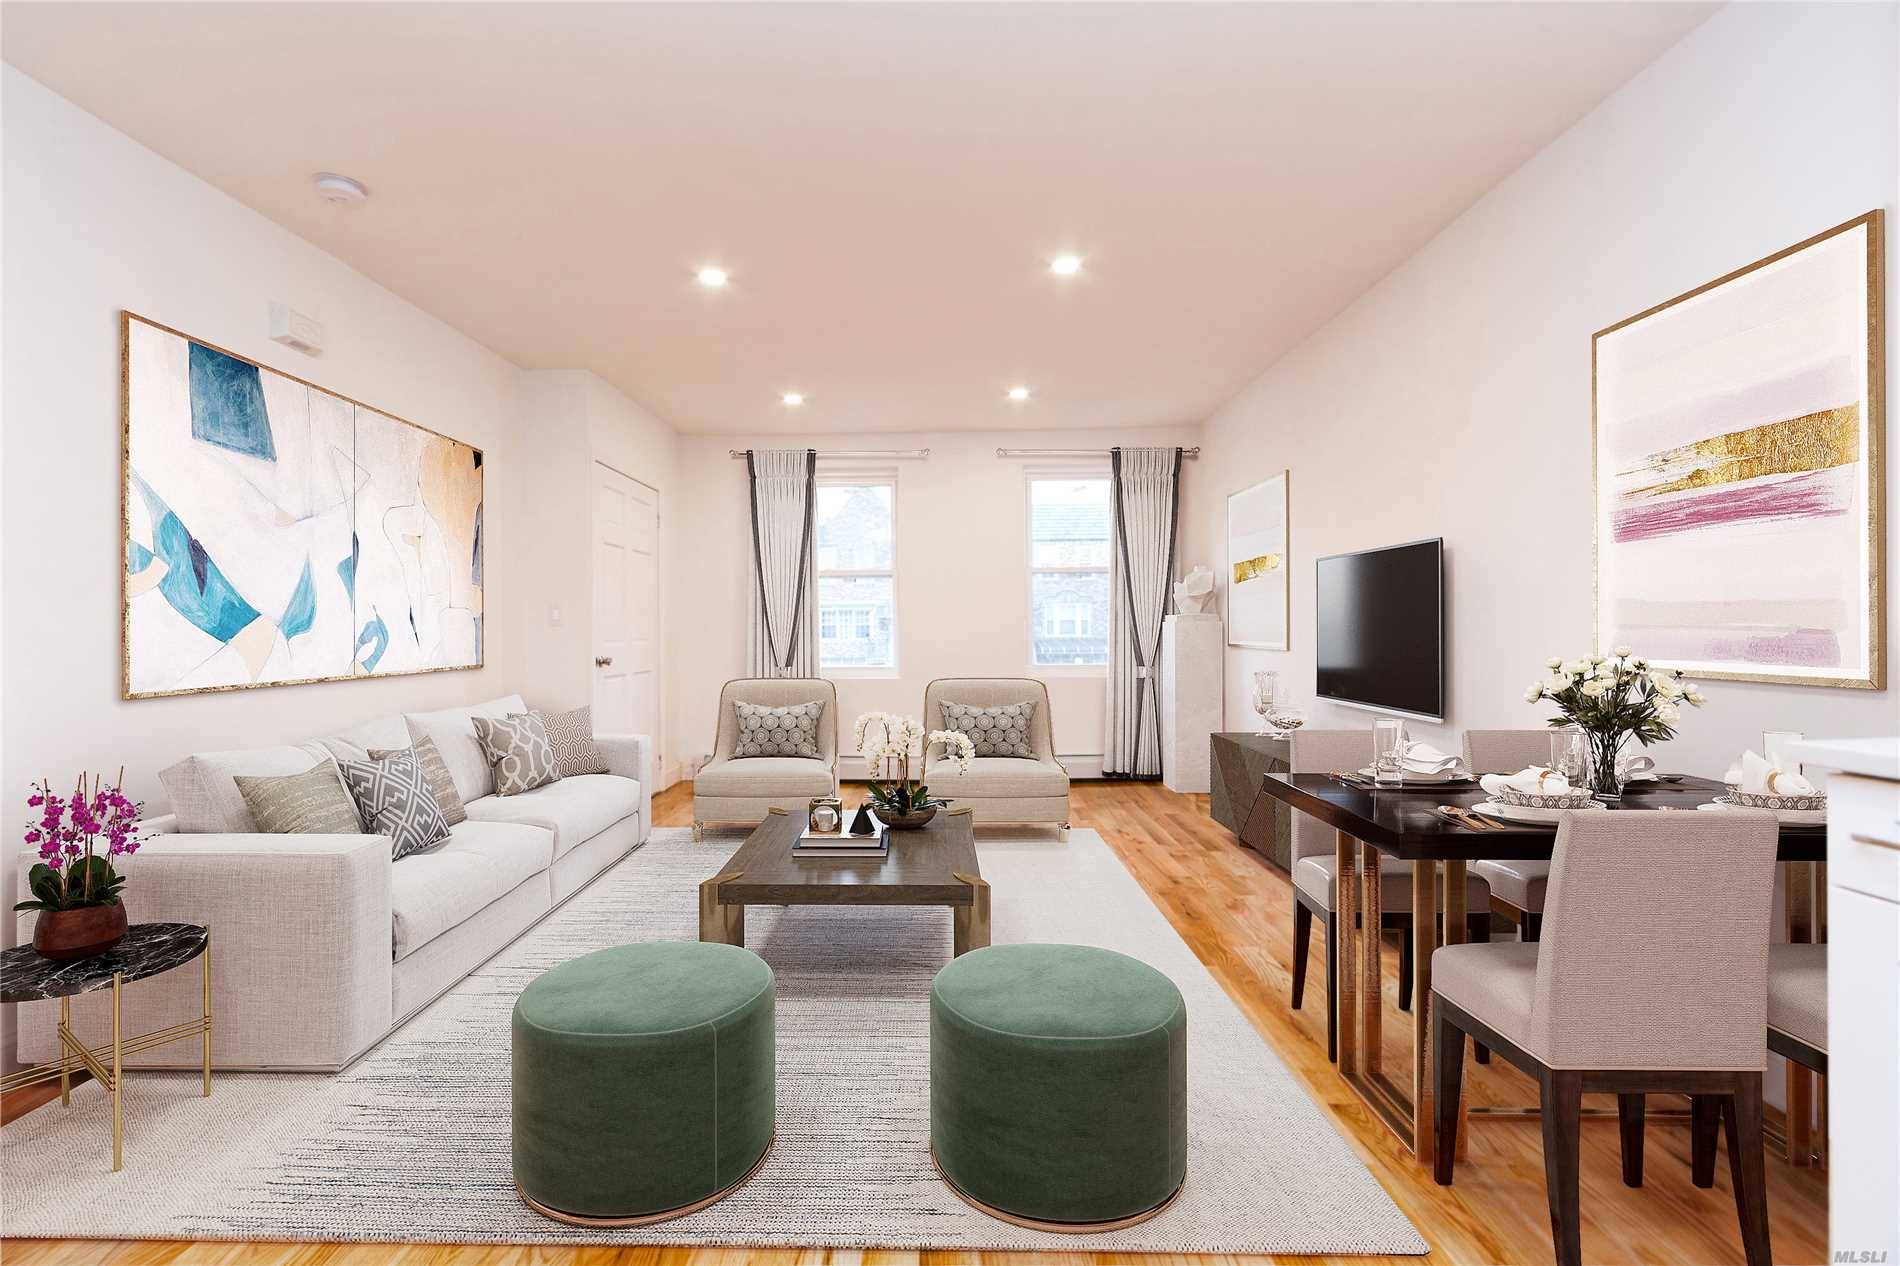 Space And Style Come Together In This Newly Renovated Brick Two Family Townhouse Nestled On A Beautiful Tree Lined Street Of East Flatbush Featuring A Driveway 2 Car Garage.